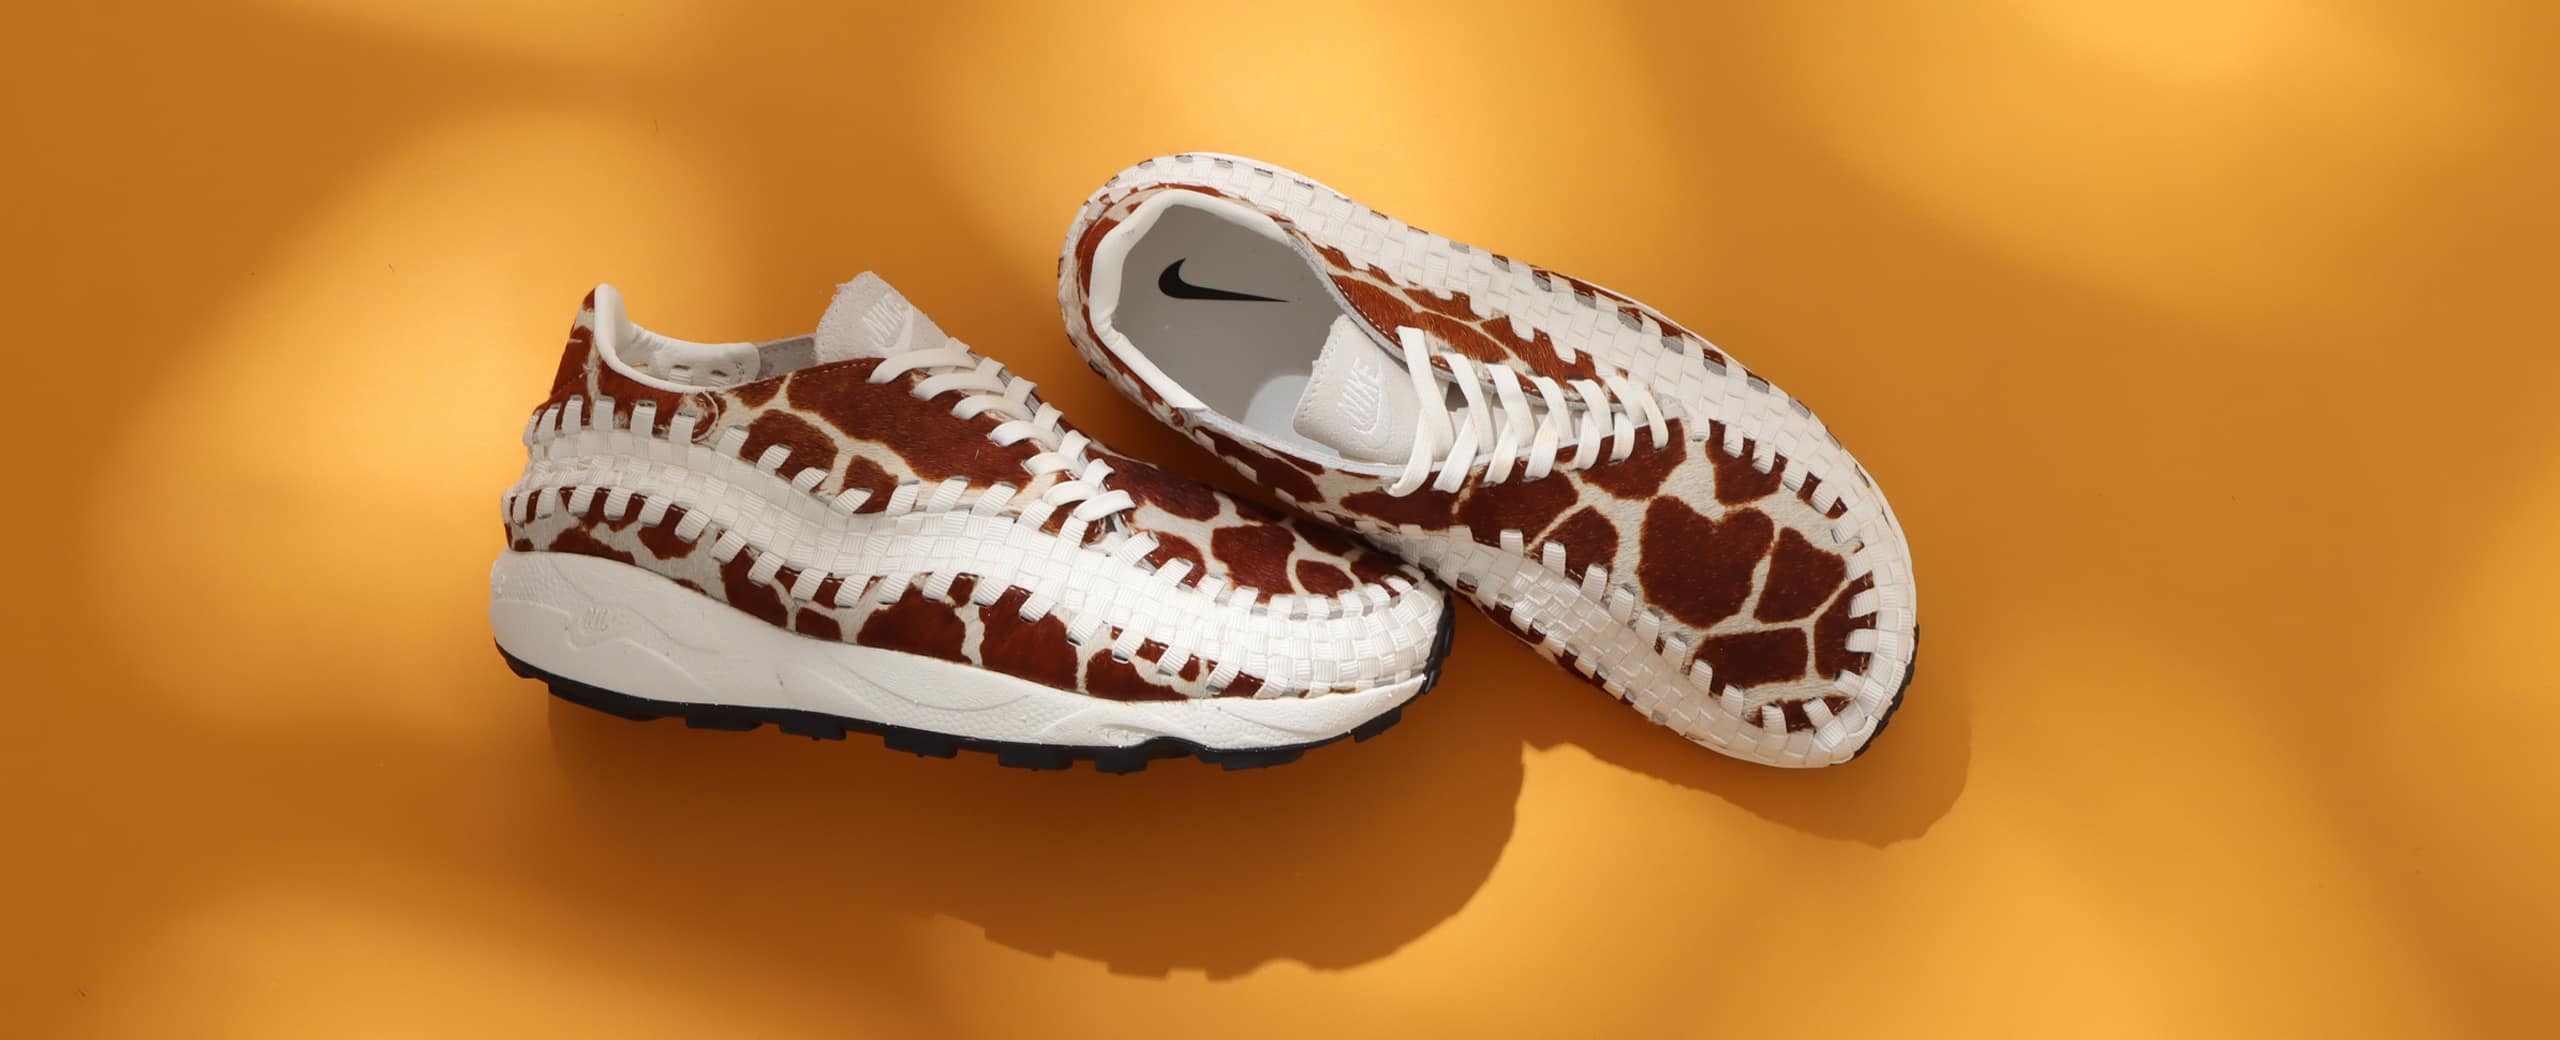 "NIKE AIR FOOTSCAPE WOVEN "Natural and Brown""